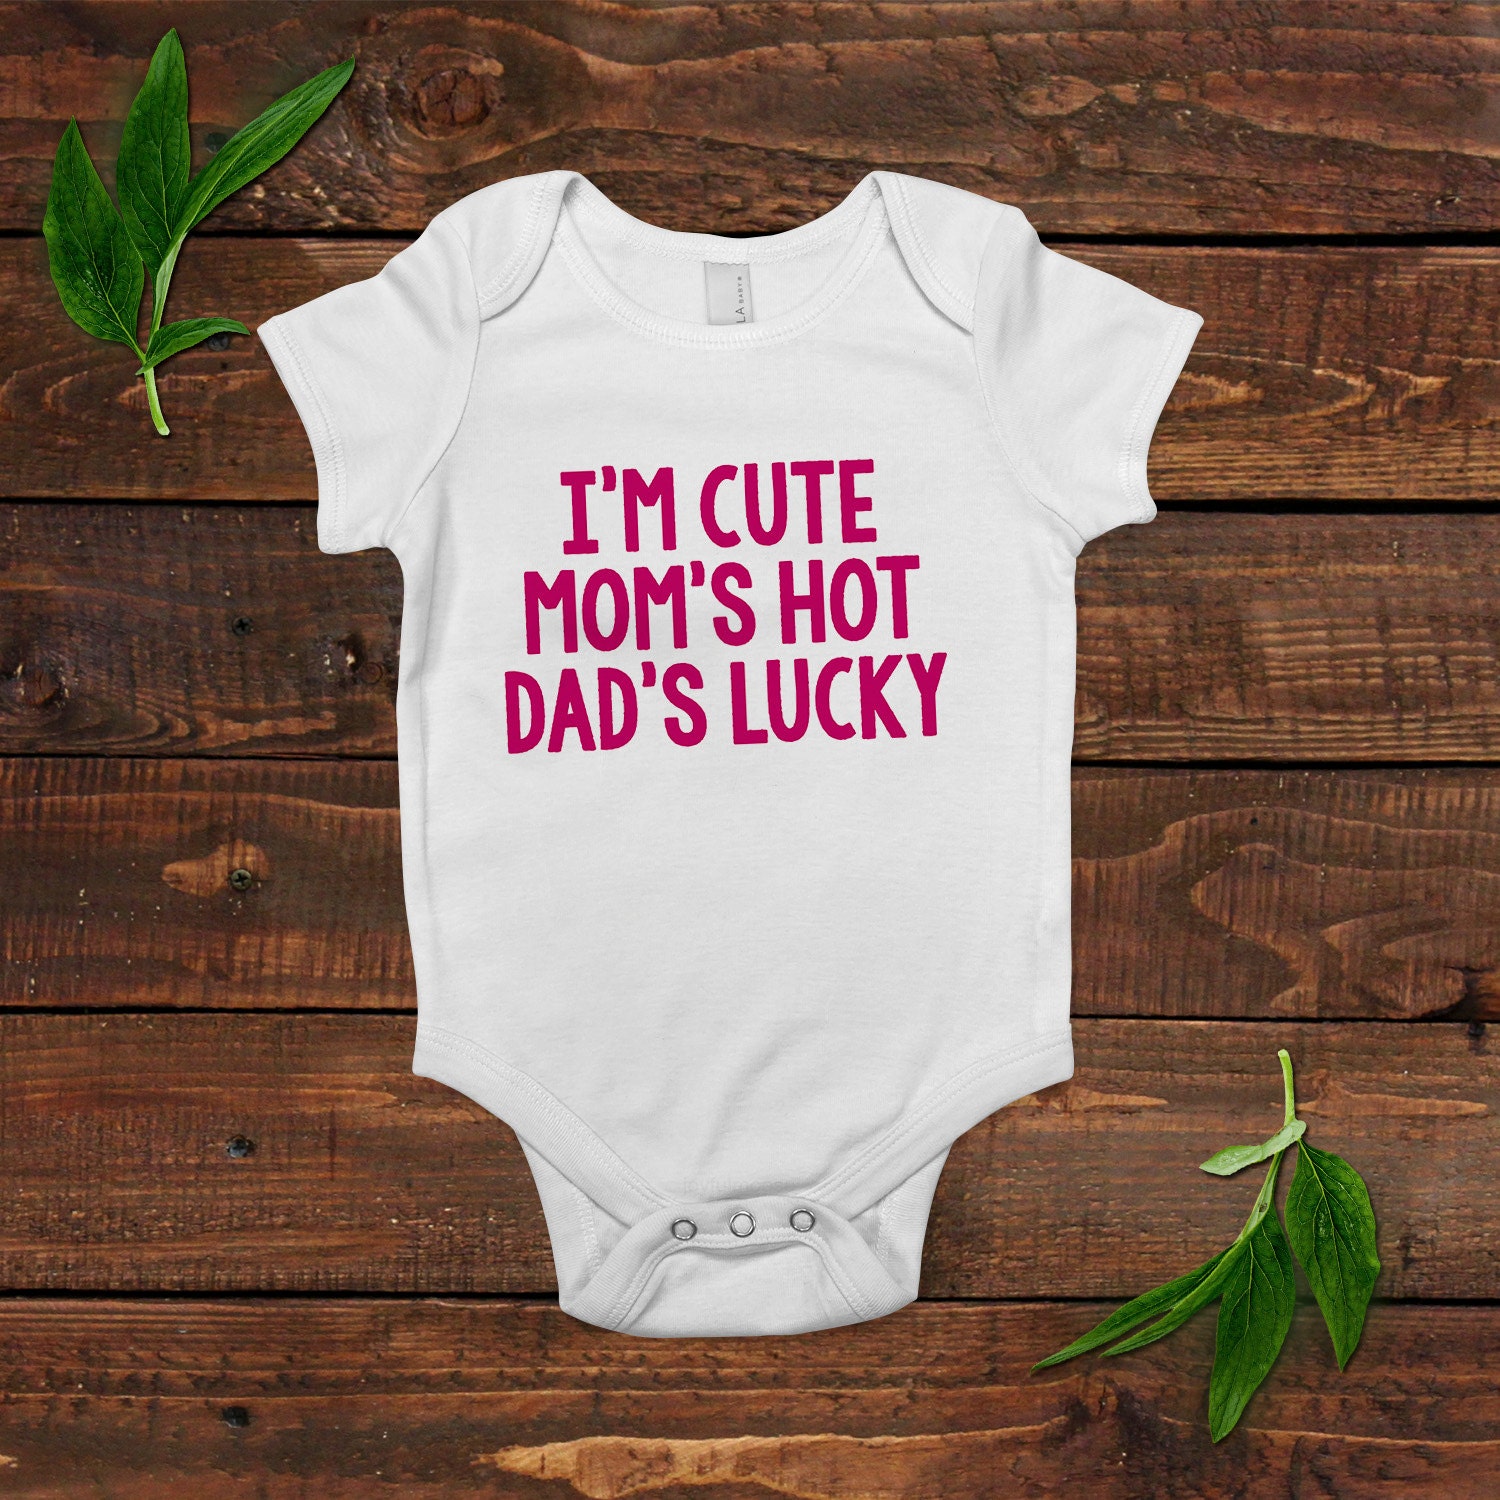 Custom Baby Bodysuit Crazy Hair Dont Care Funny Humor Cotton Boy & Girl Clothes